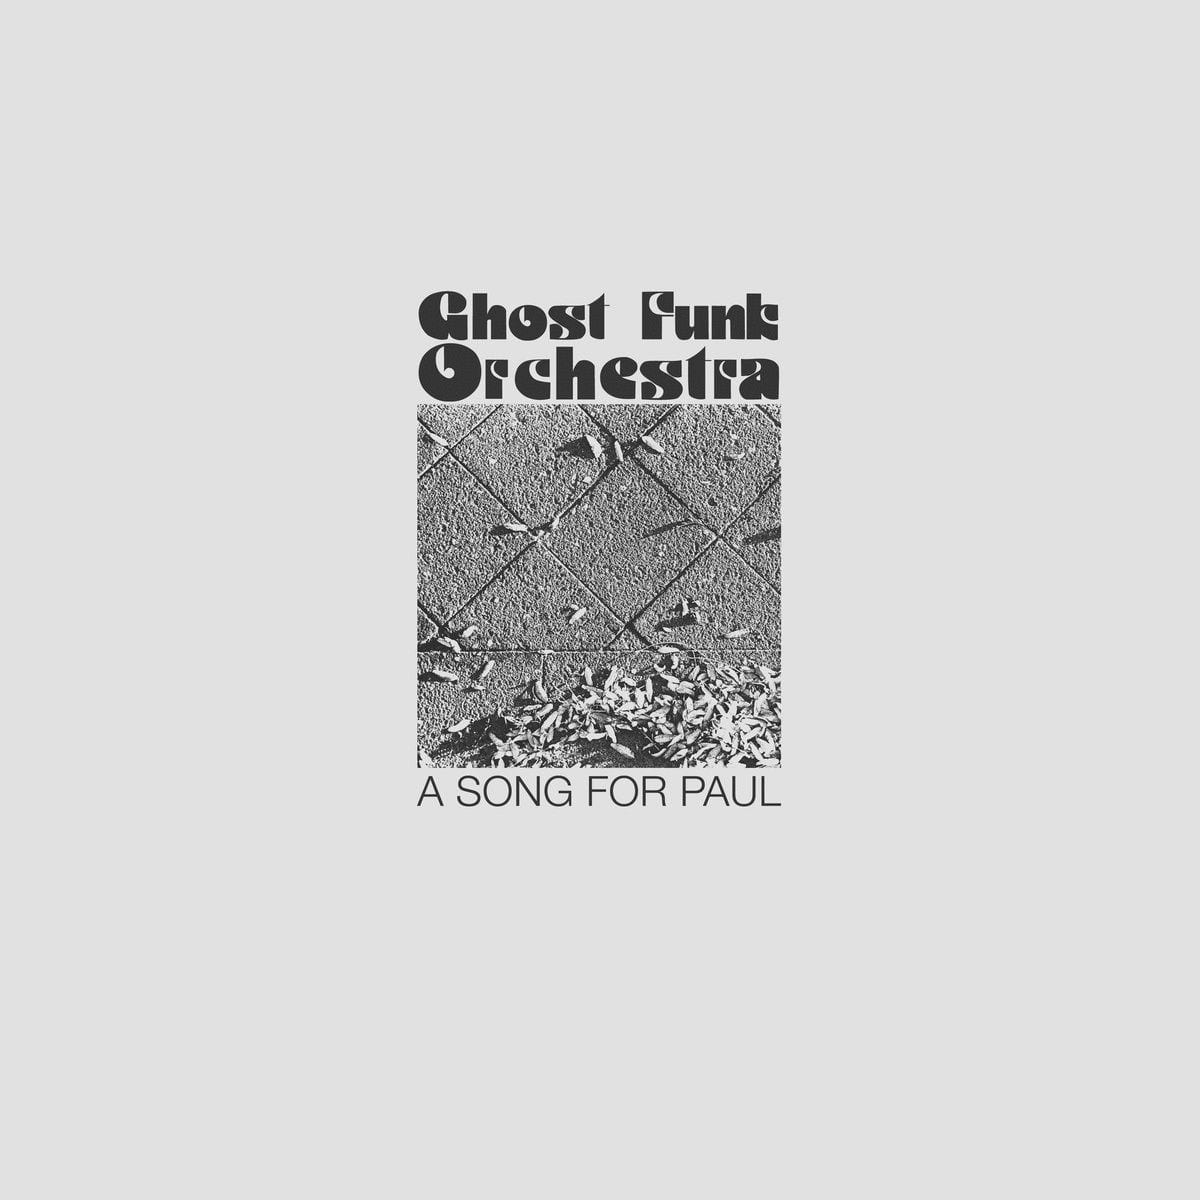 ghost-funk-orchestra-song-paul